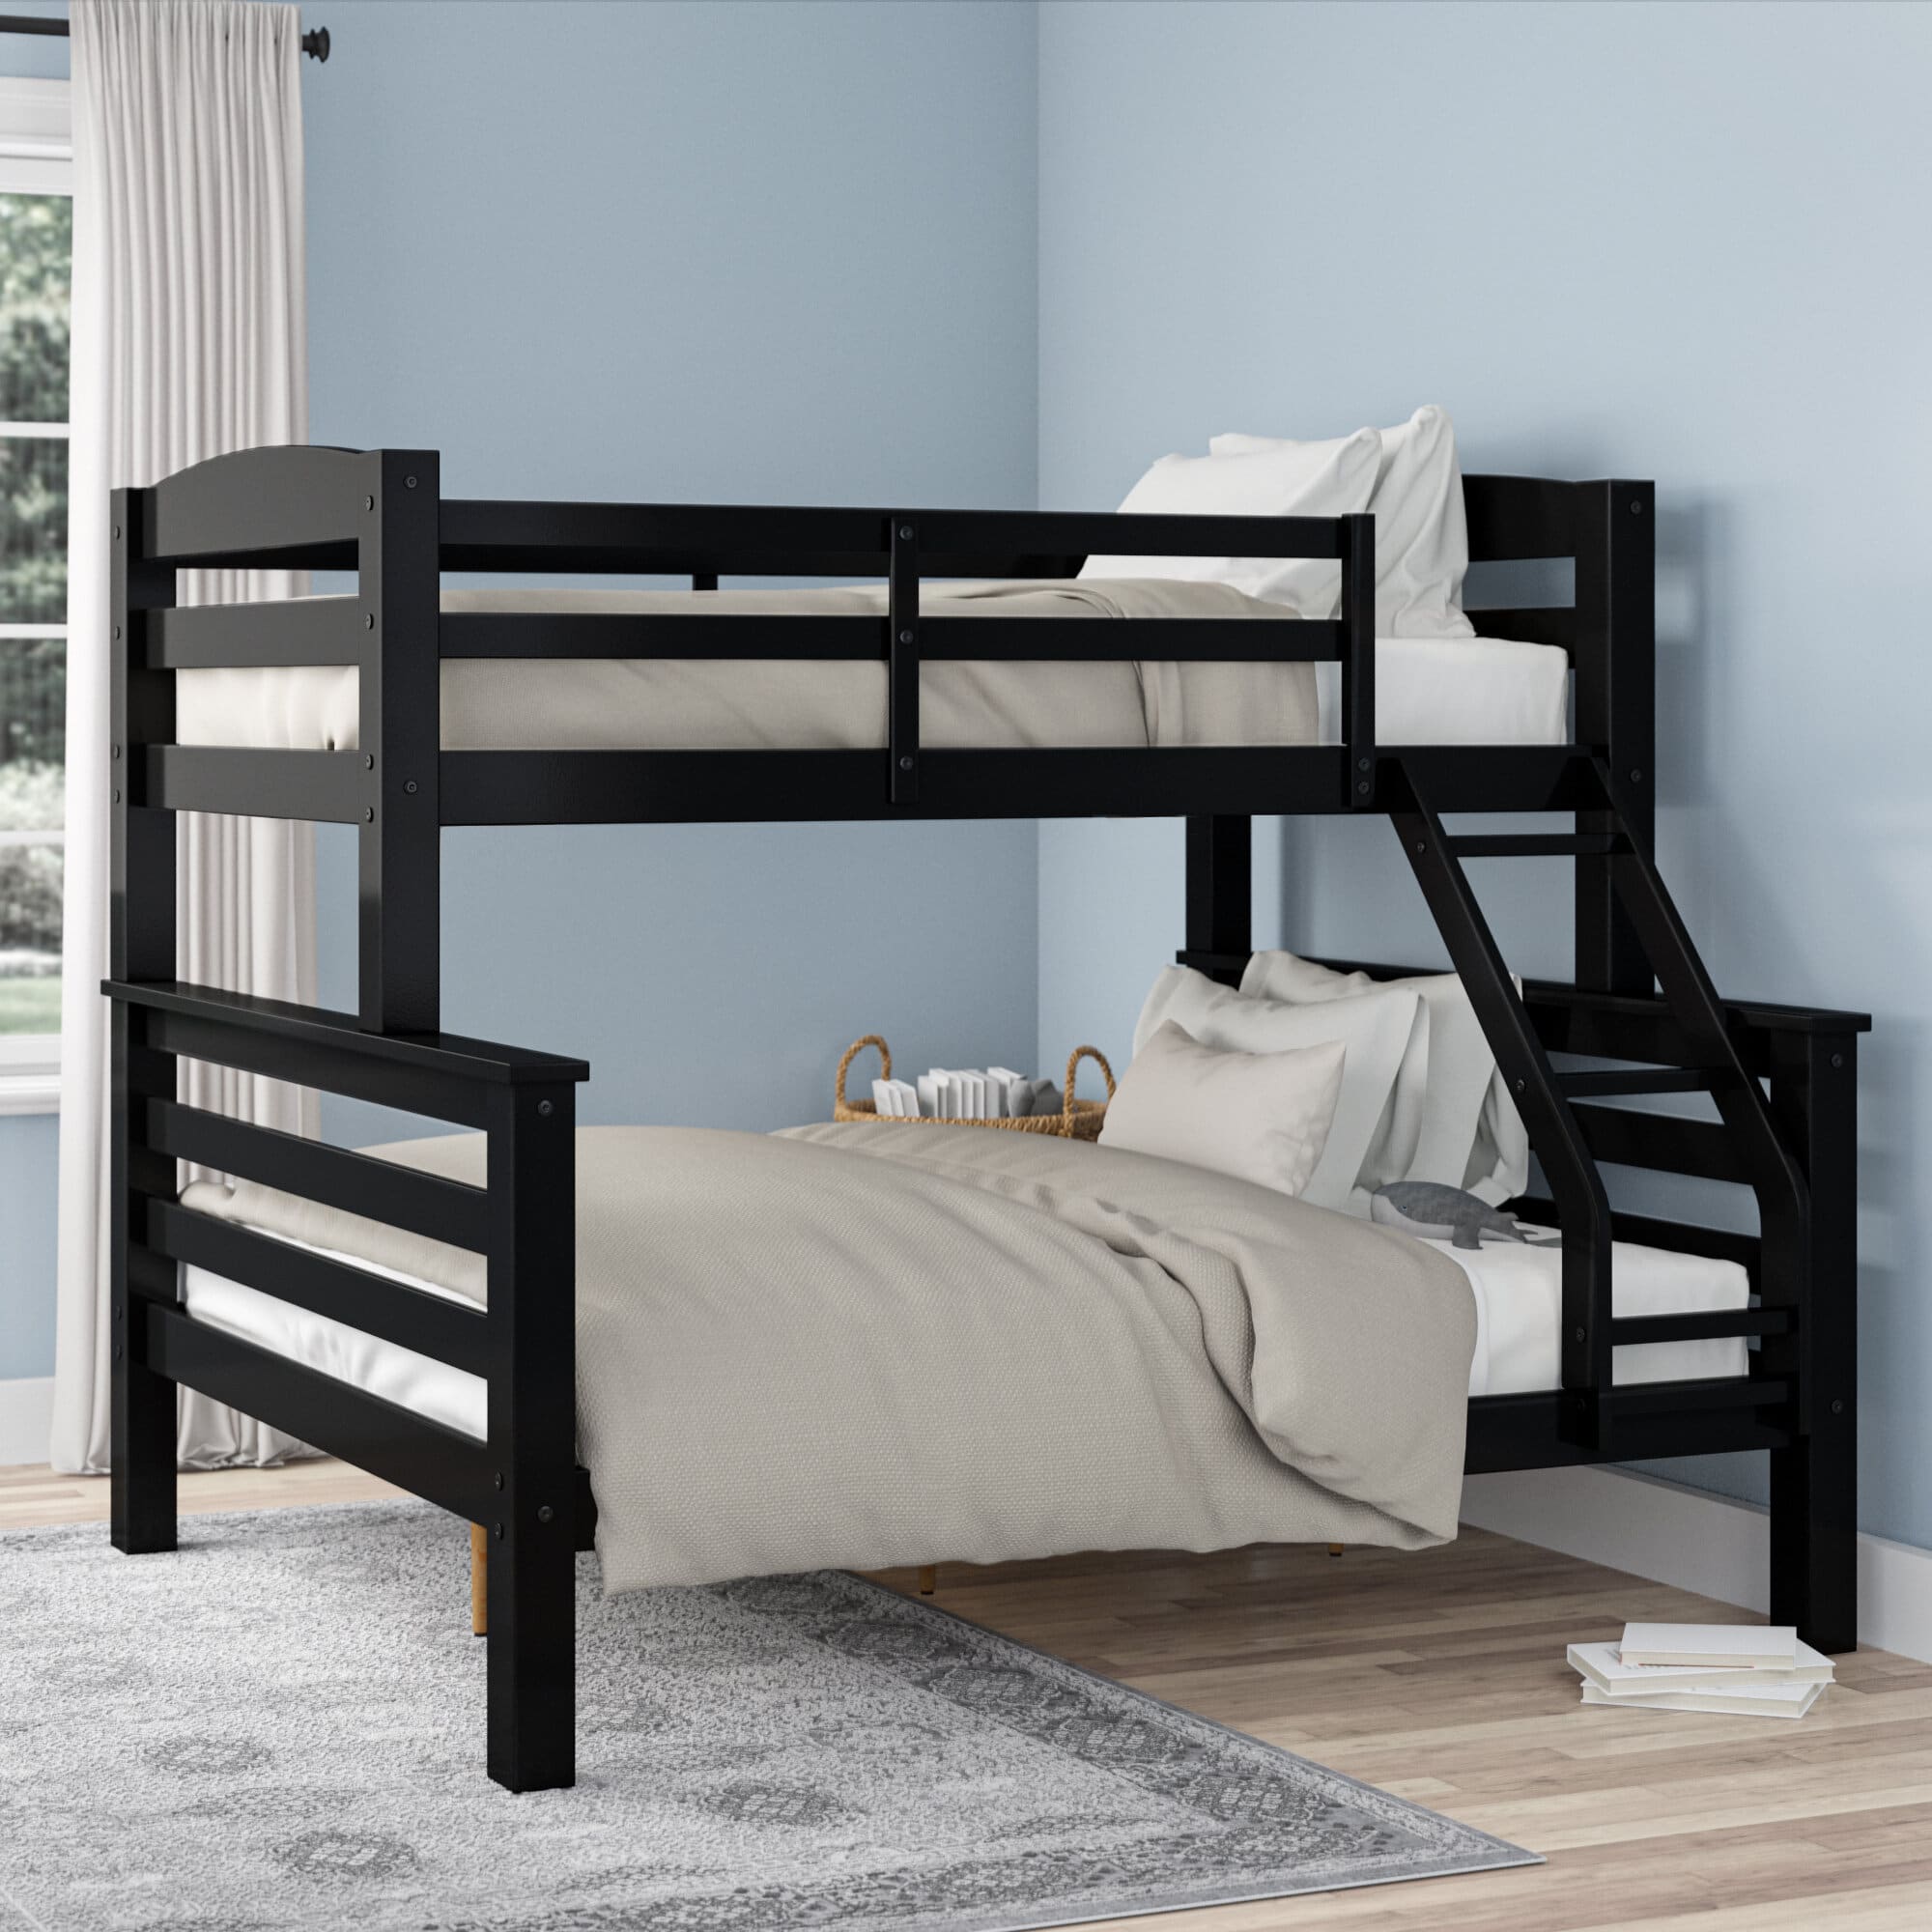 6 Best Twin Over Full Bunk Beds May, Twin Full Bunk Bed